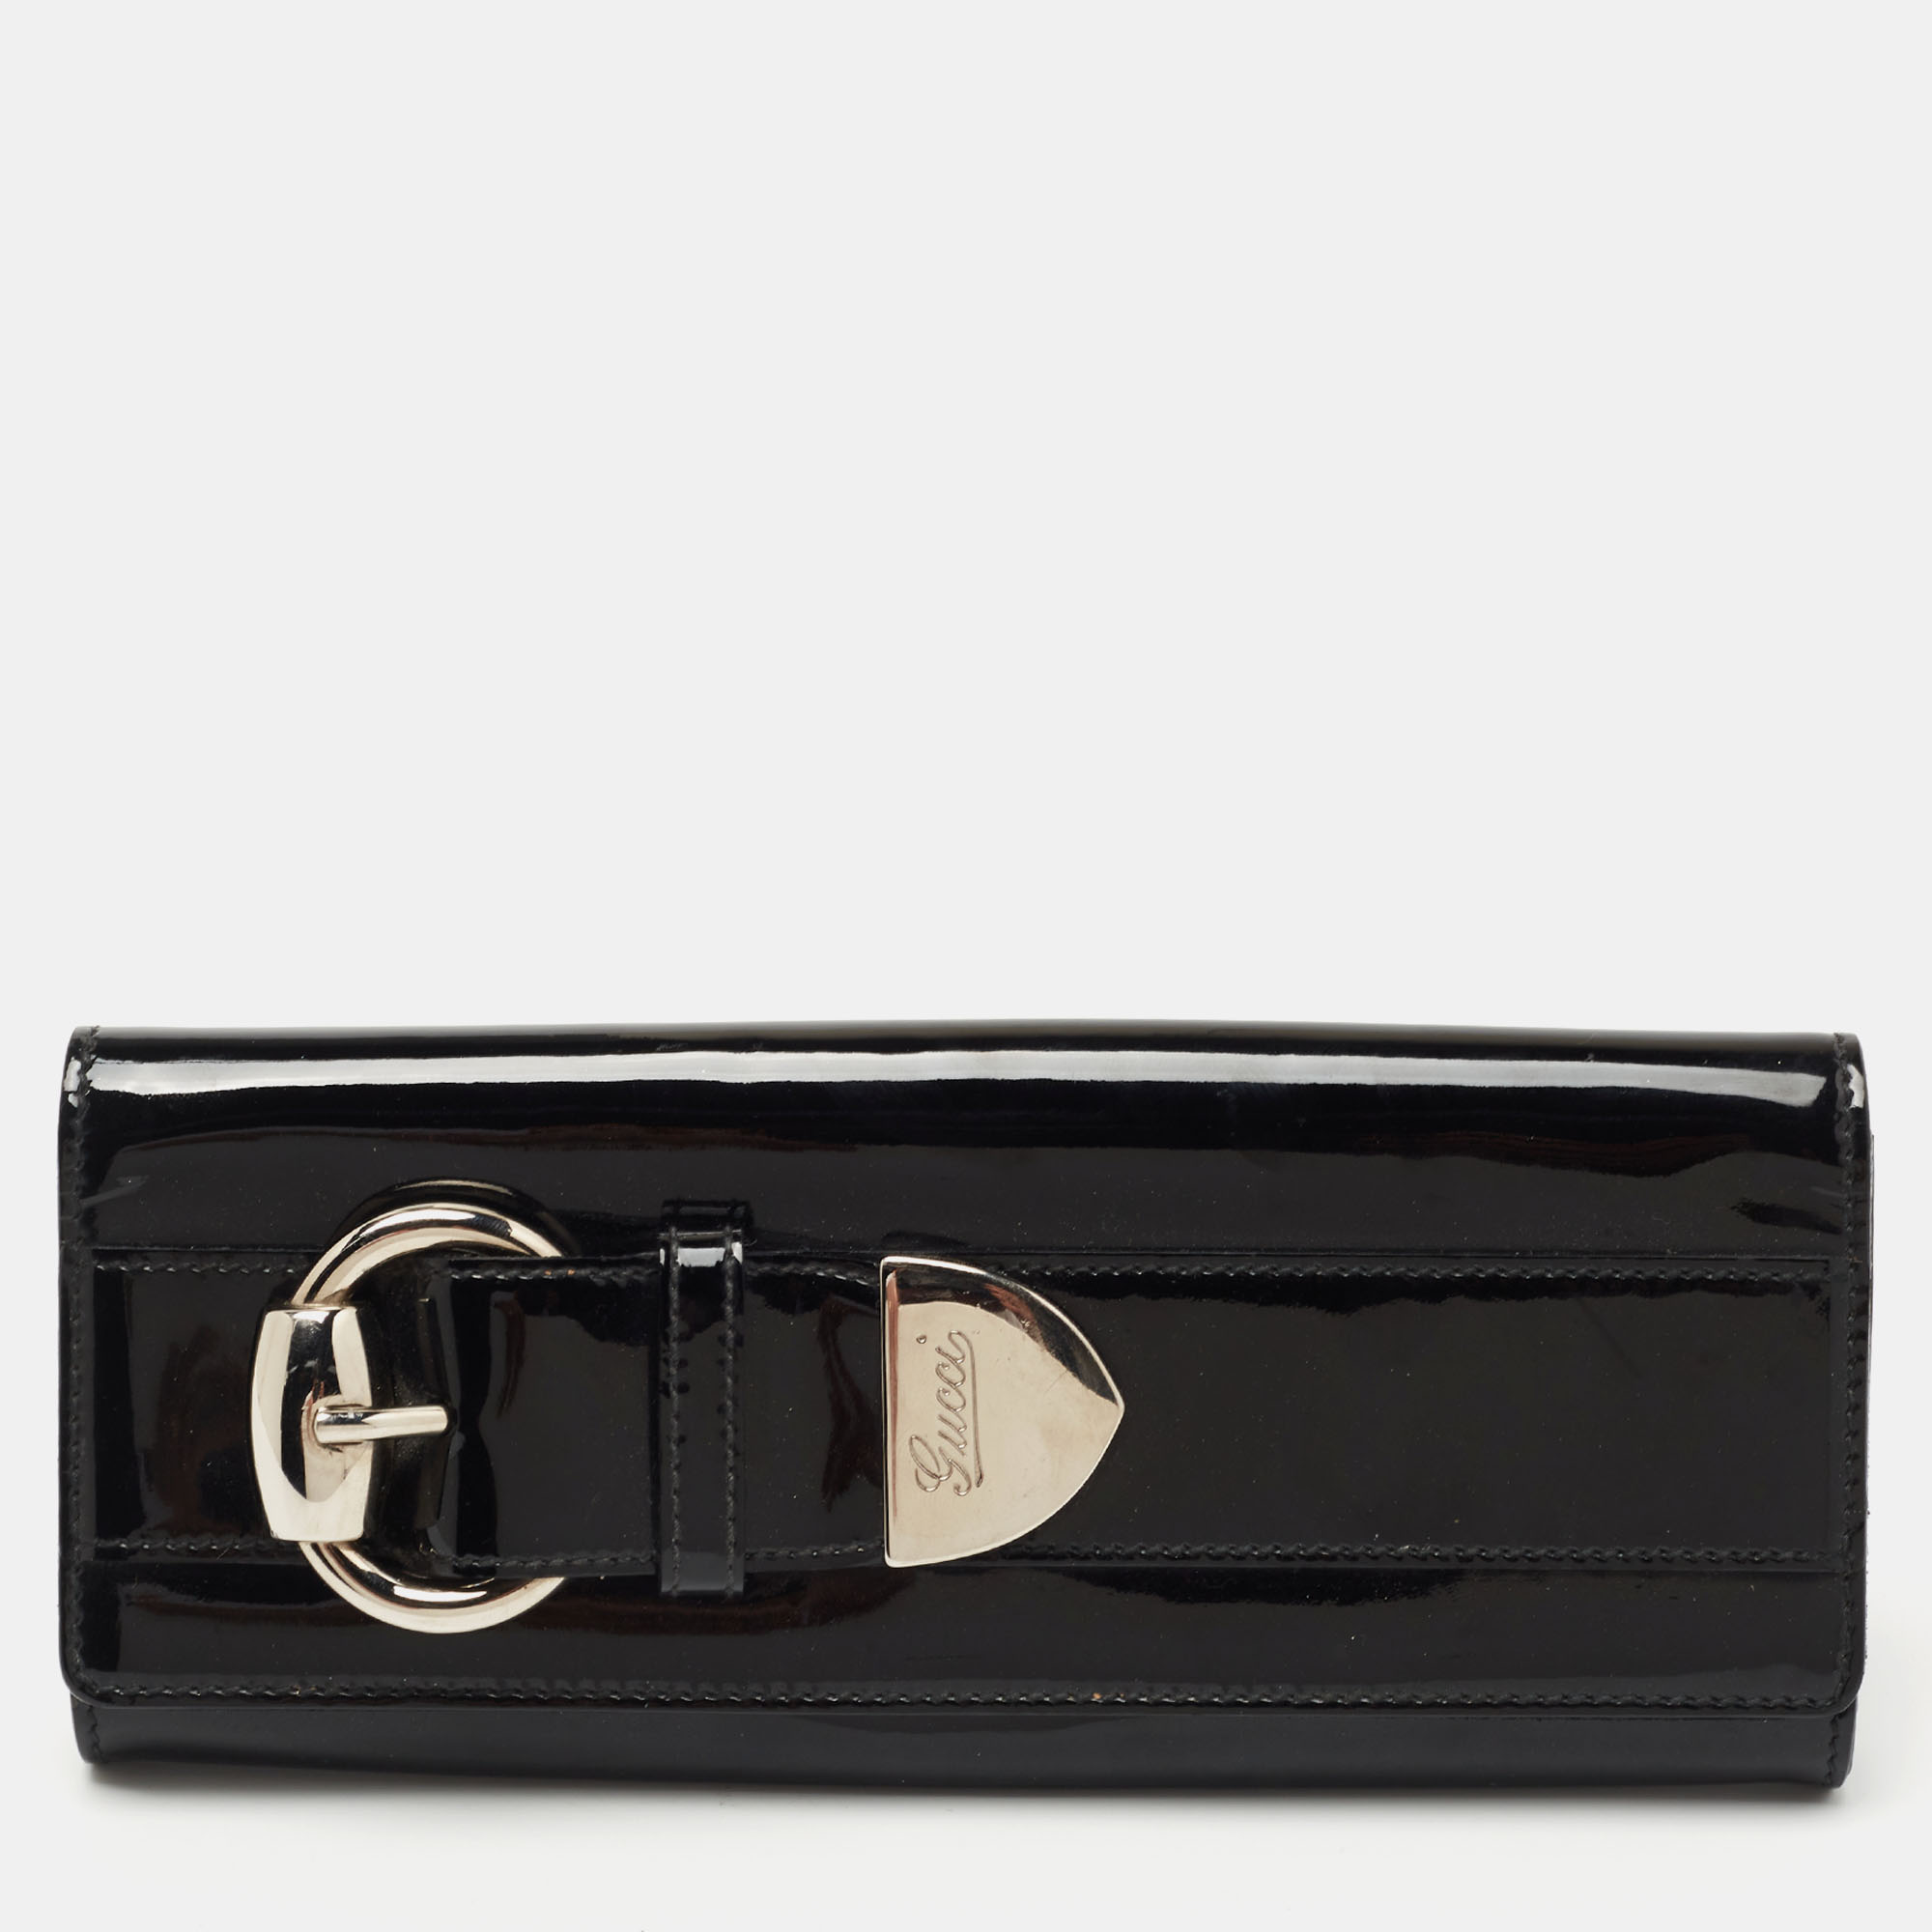 Pre-owned Gucci Black Patent Leather Romy Clutch